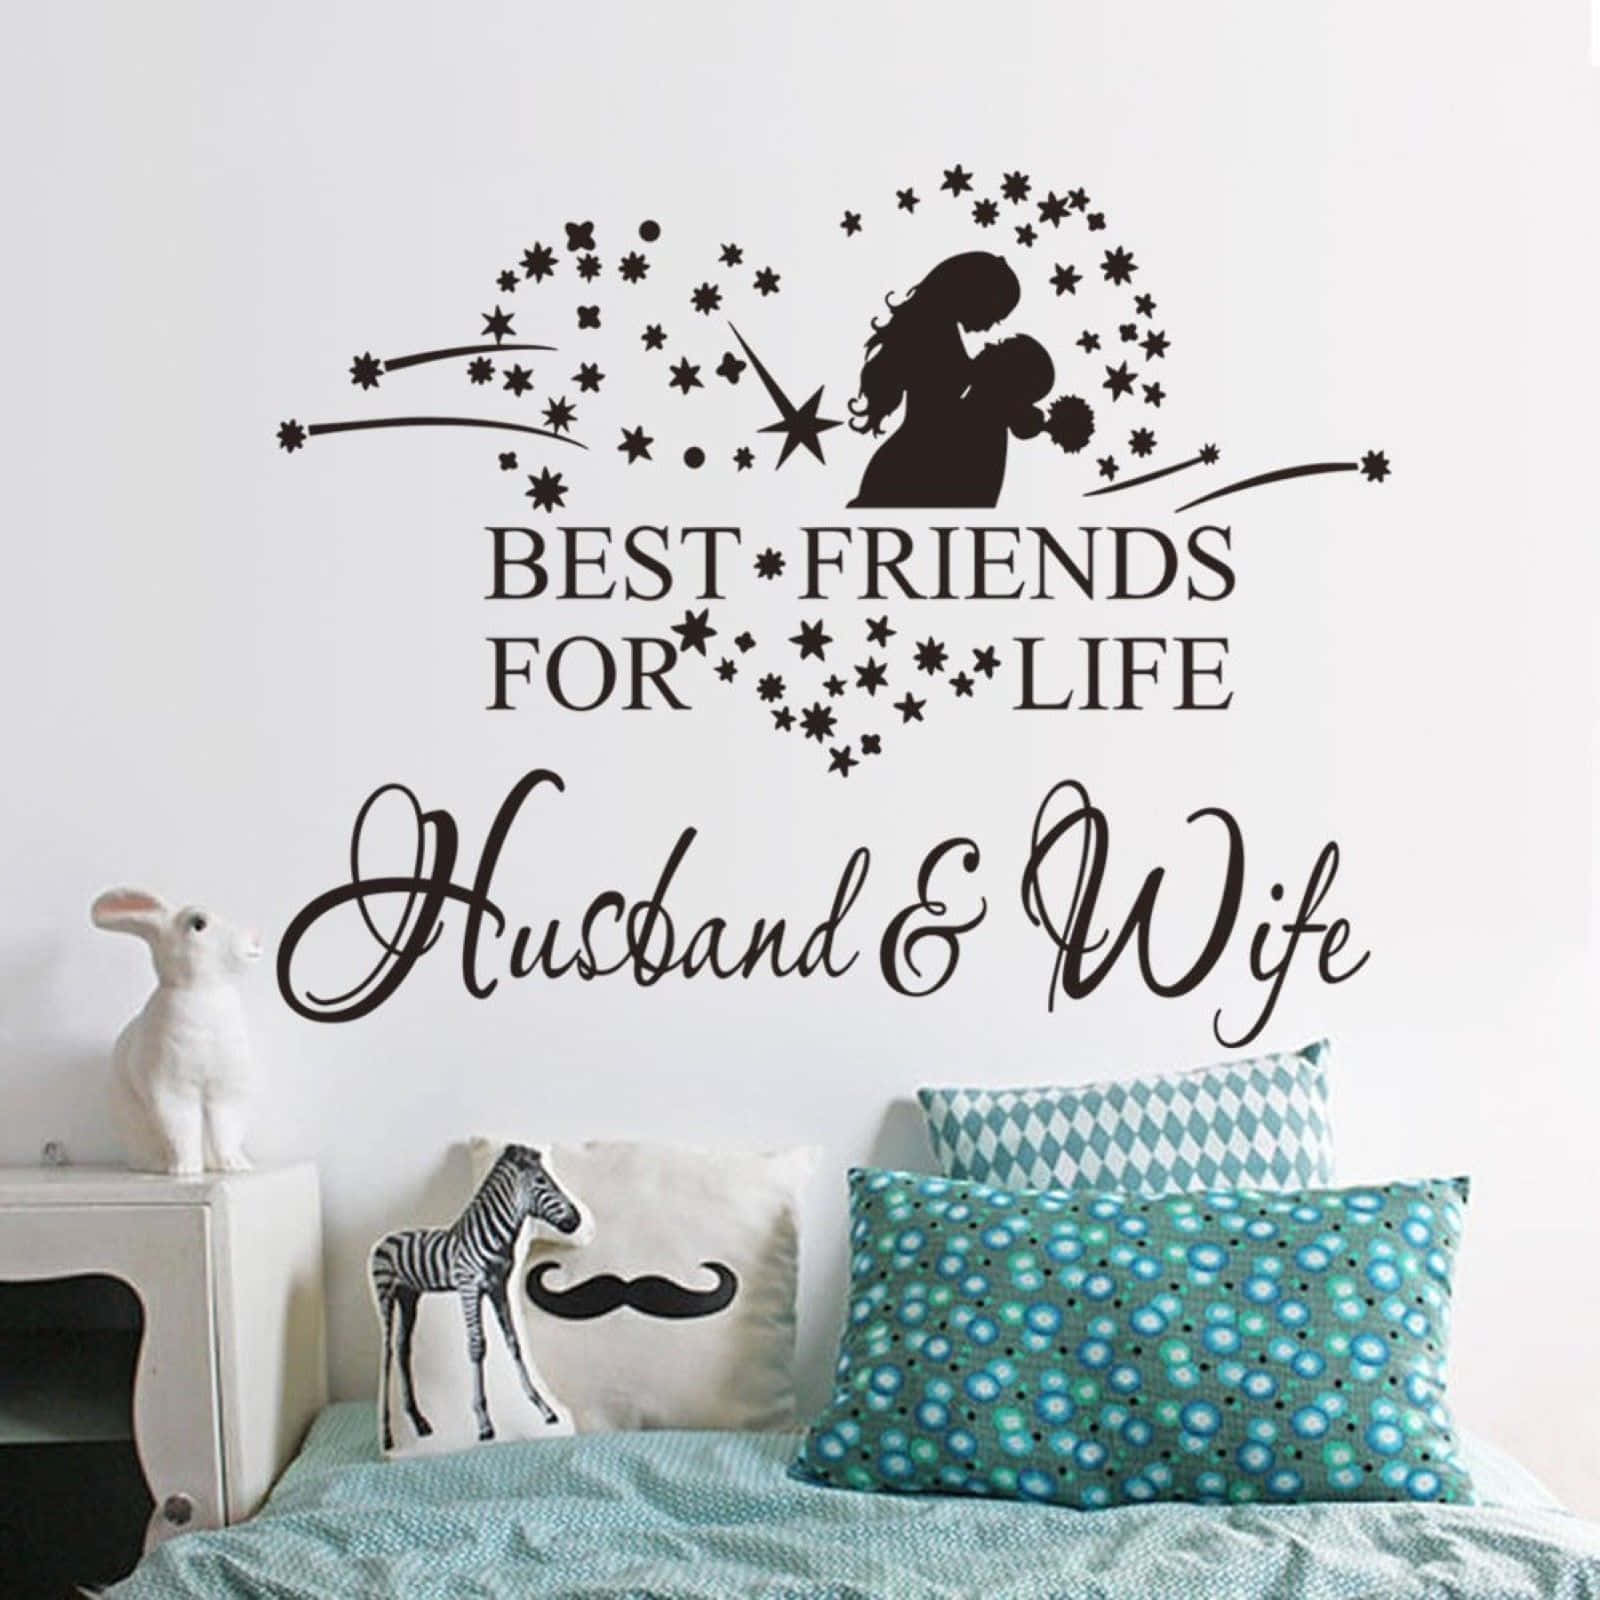 Husband And Wife Bedroom Wall Art Pictures